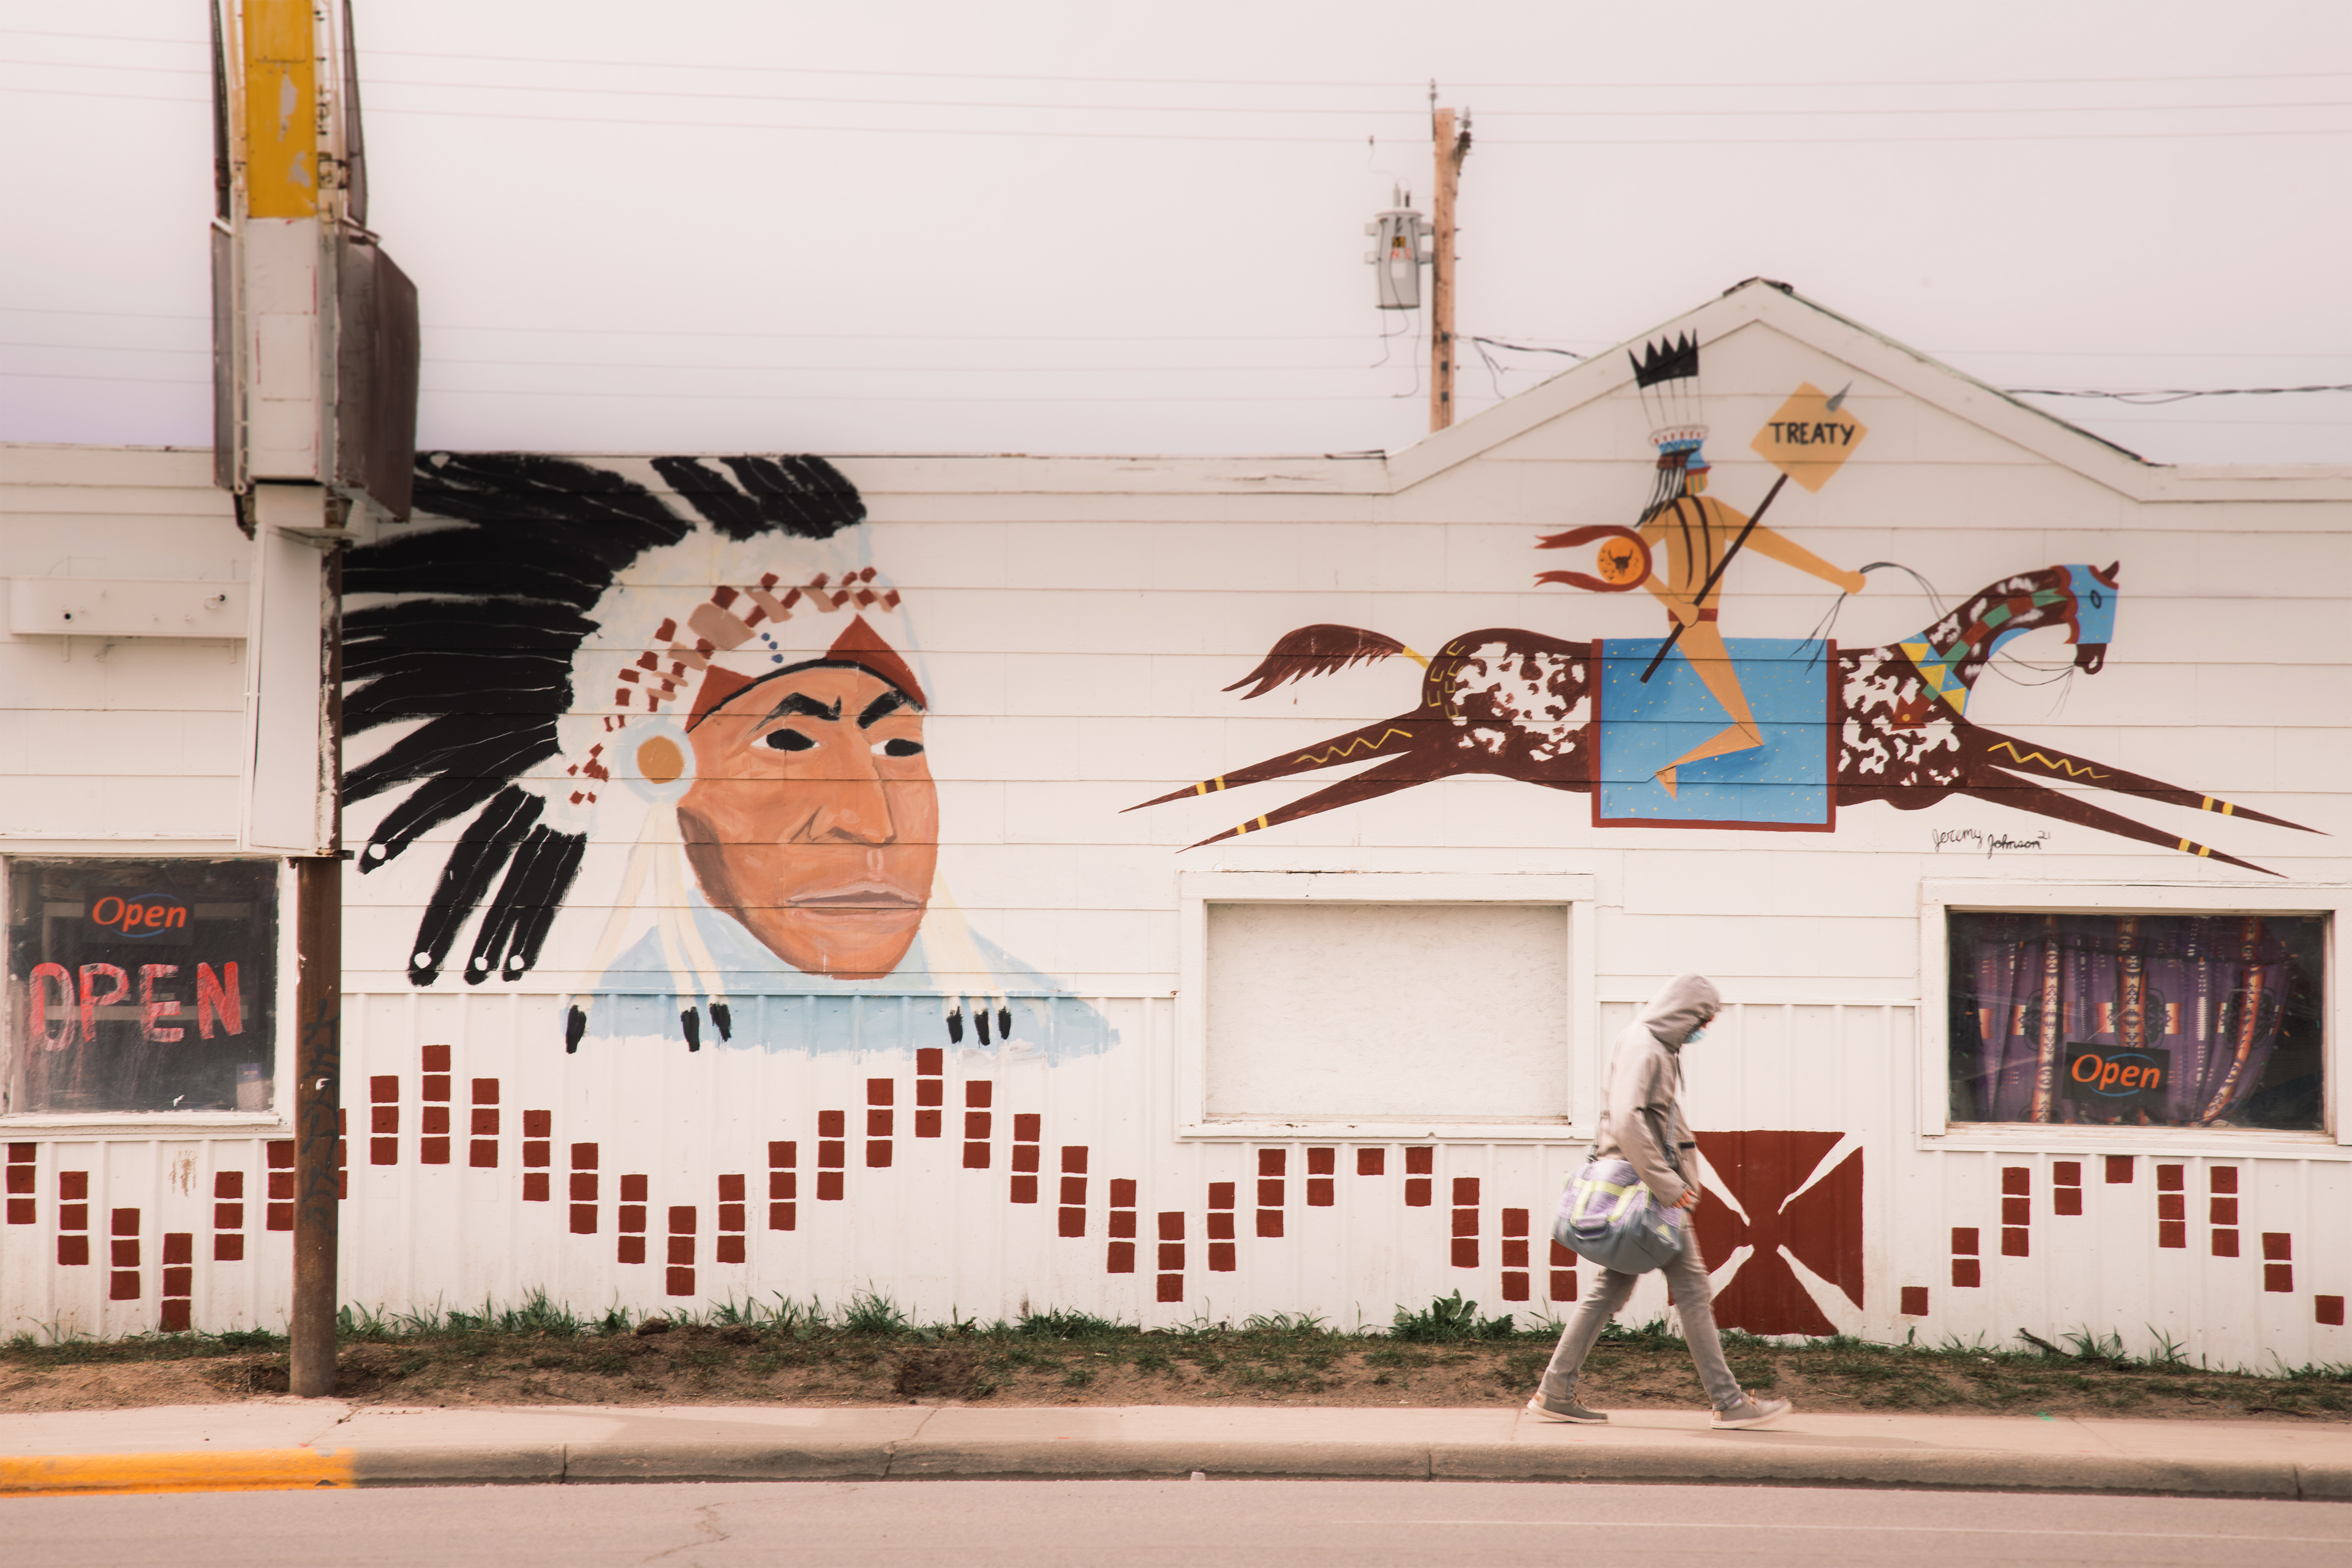 A person is seen walking on the sidewalk by a building in Browning, Montana. The side of the building is painted with an image of a Native American man wearing a war bonnet. Another painting shows a Native American on horseback holding a spear piercing through a sign that reads, "TREATY."